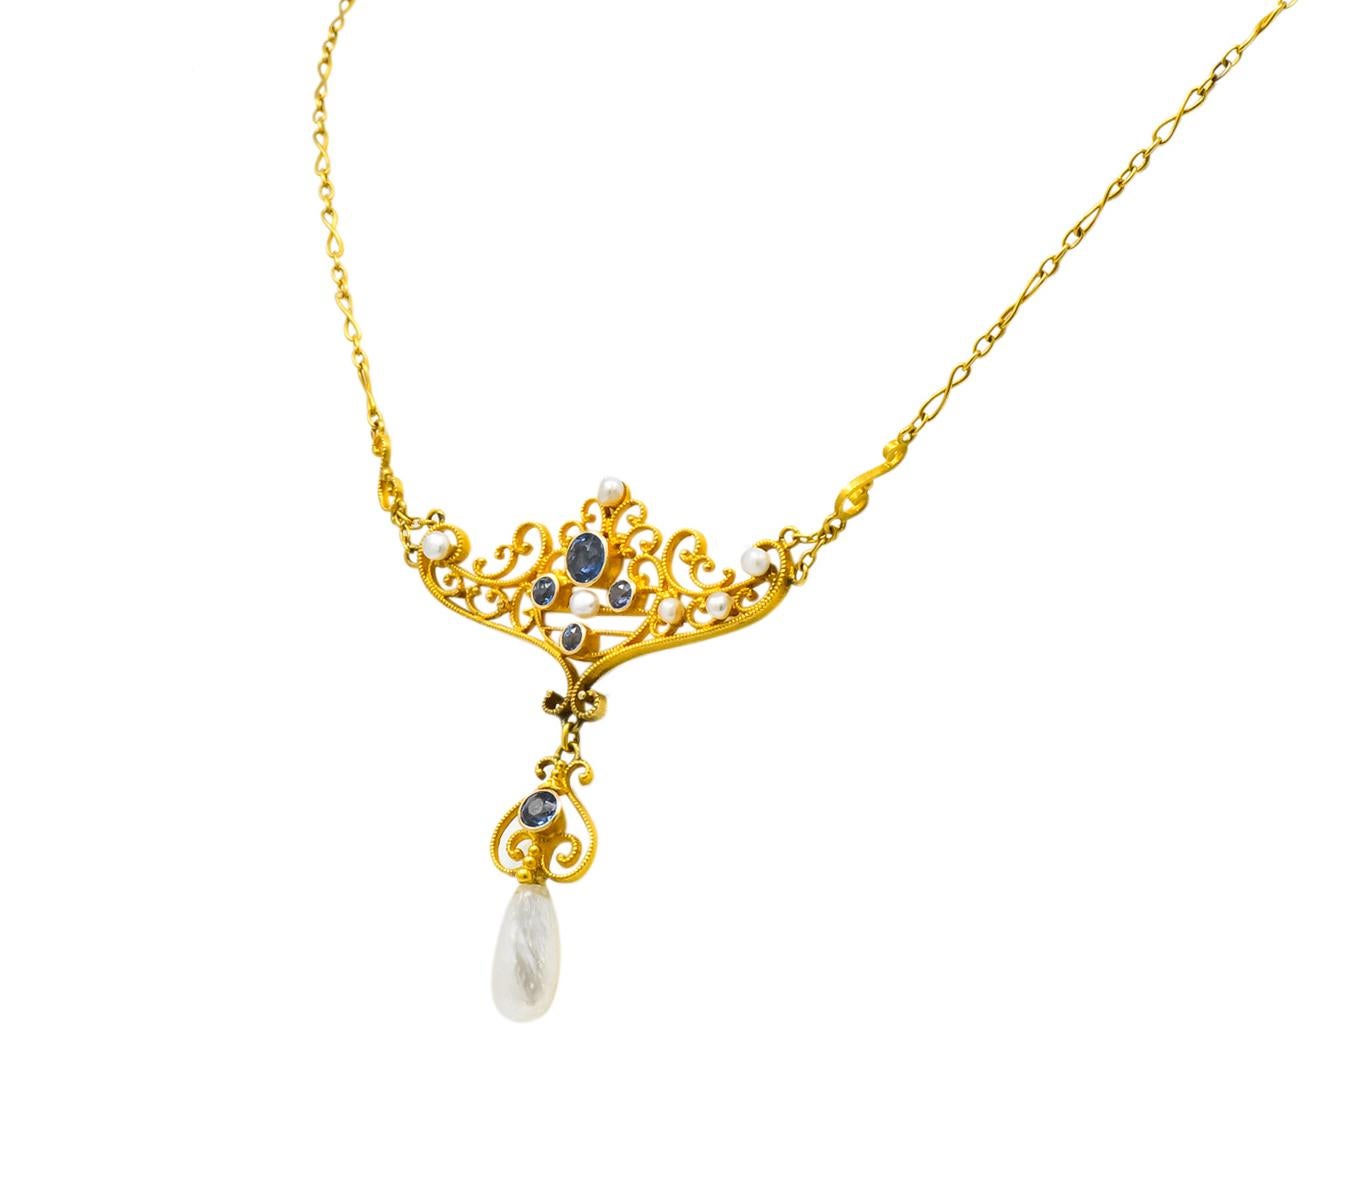 Designed as a matte gold scrolled motif necklace station with articulated drop and millegrain detail

Bezel set with five round cut sapphires weighing approximately 0.57 carat total, transparent and a grayish cornflower blue

Accented throughout